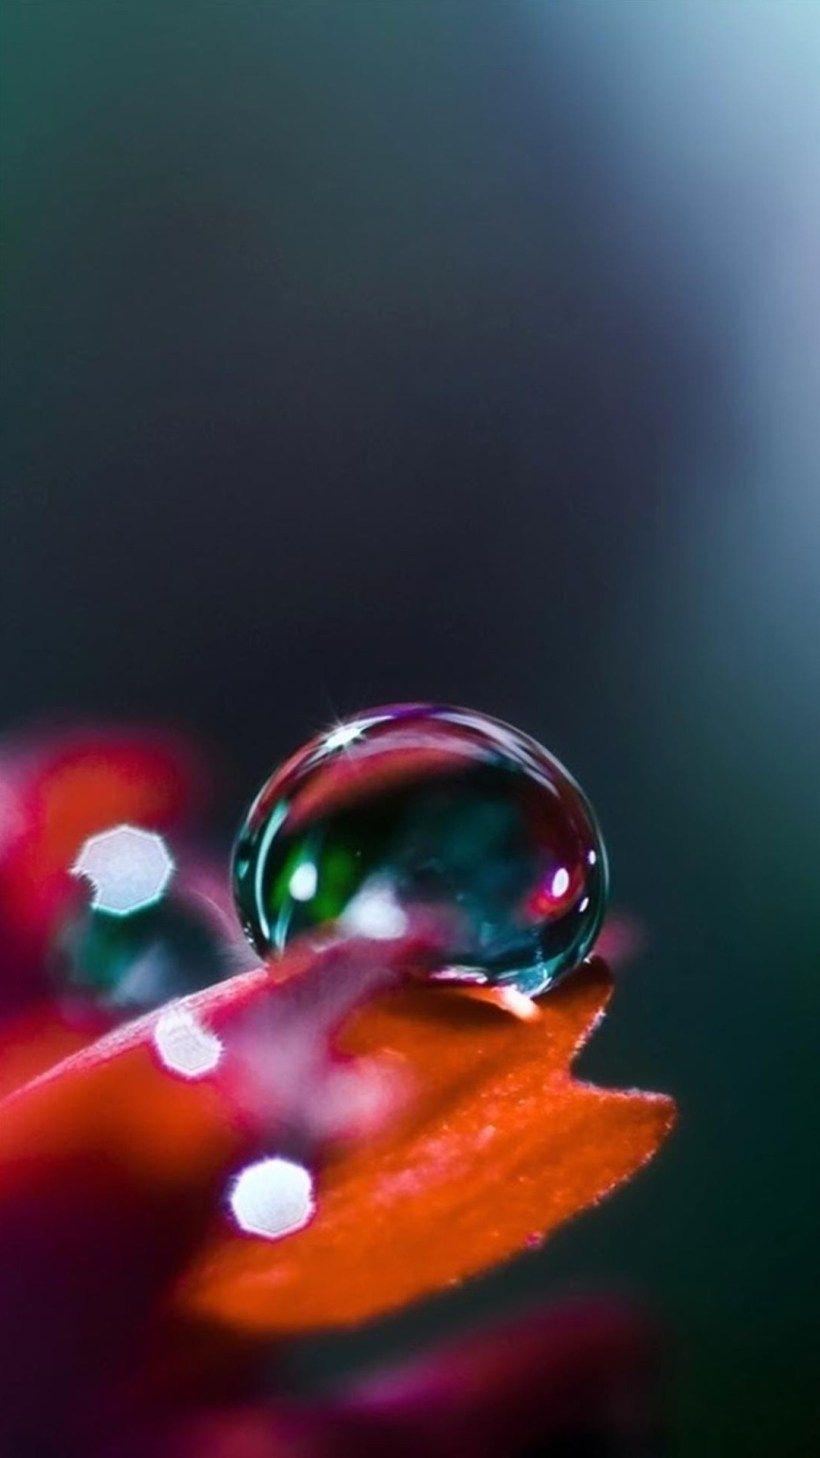 Water Droplets HD Wallpaper For Mobile